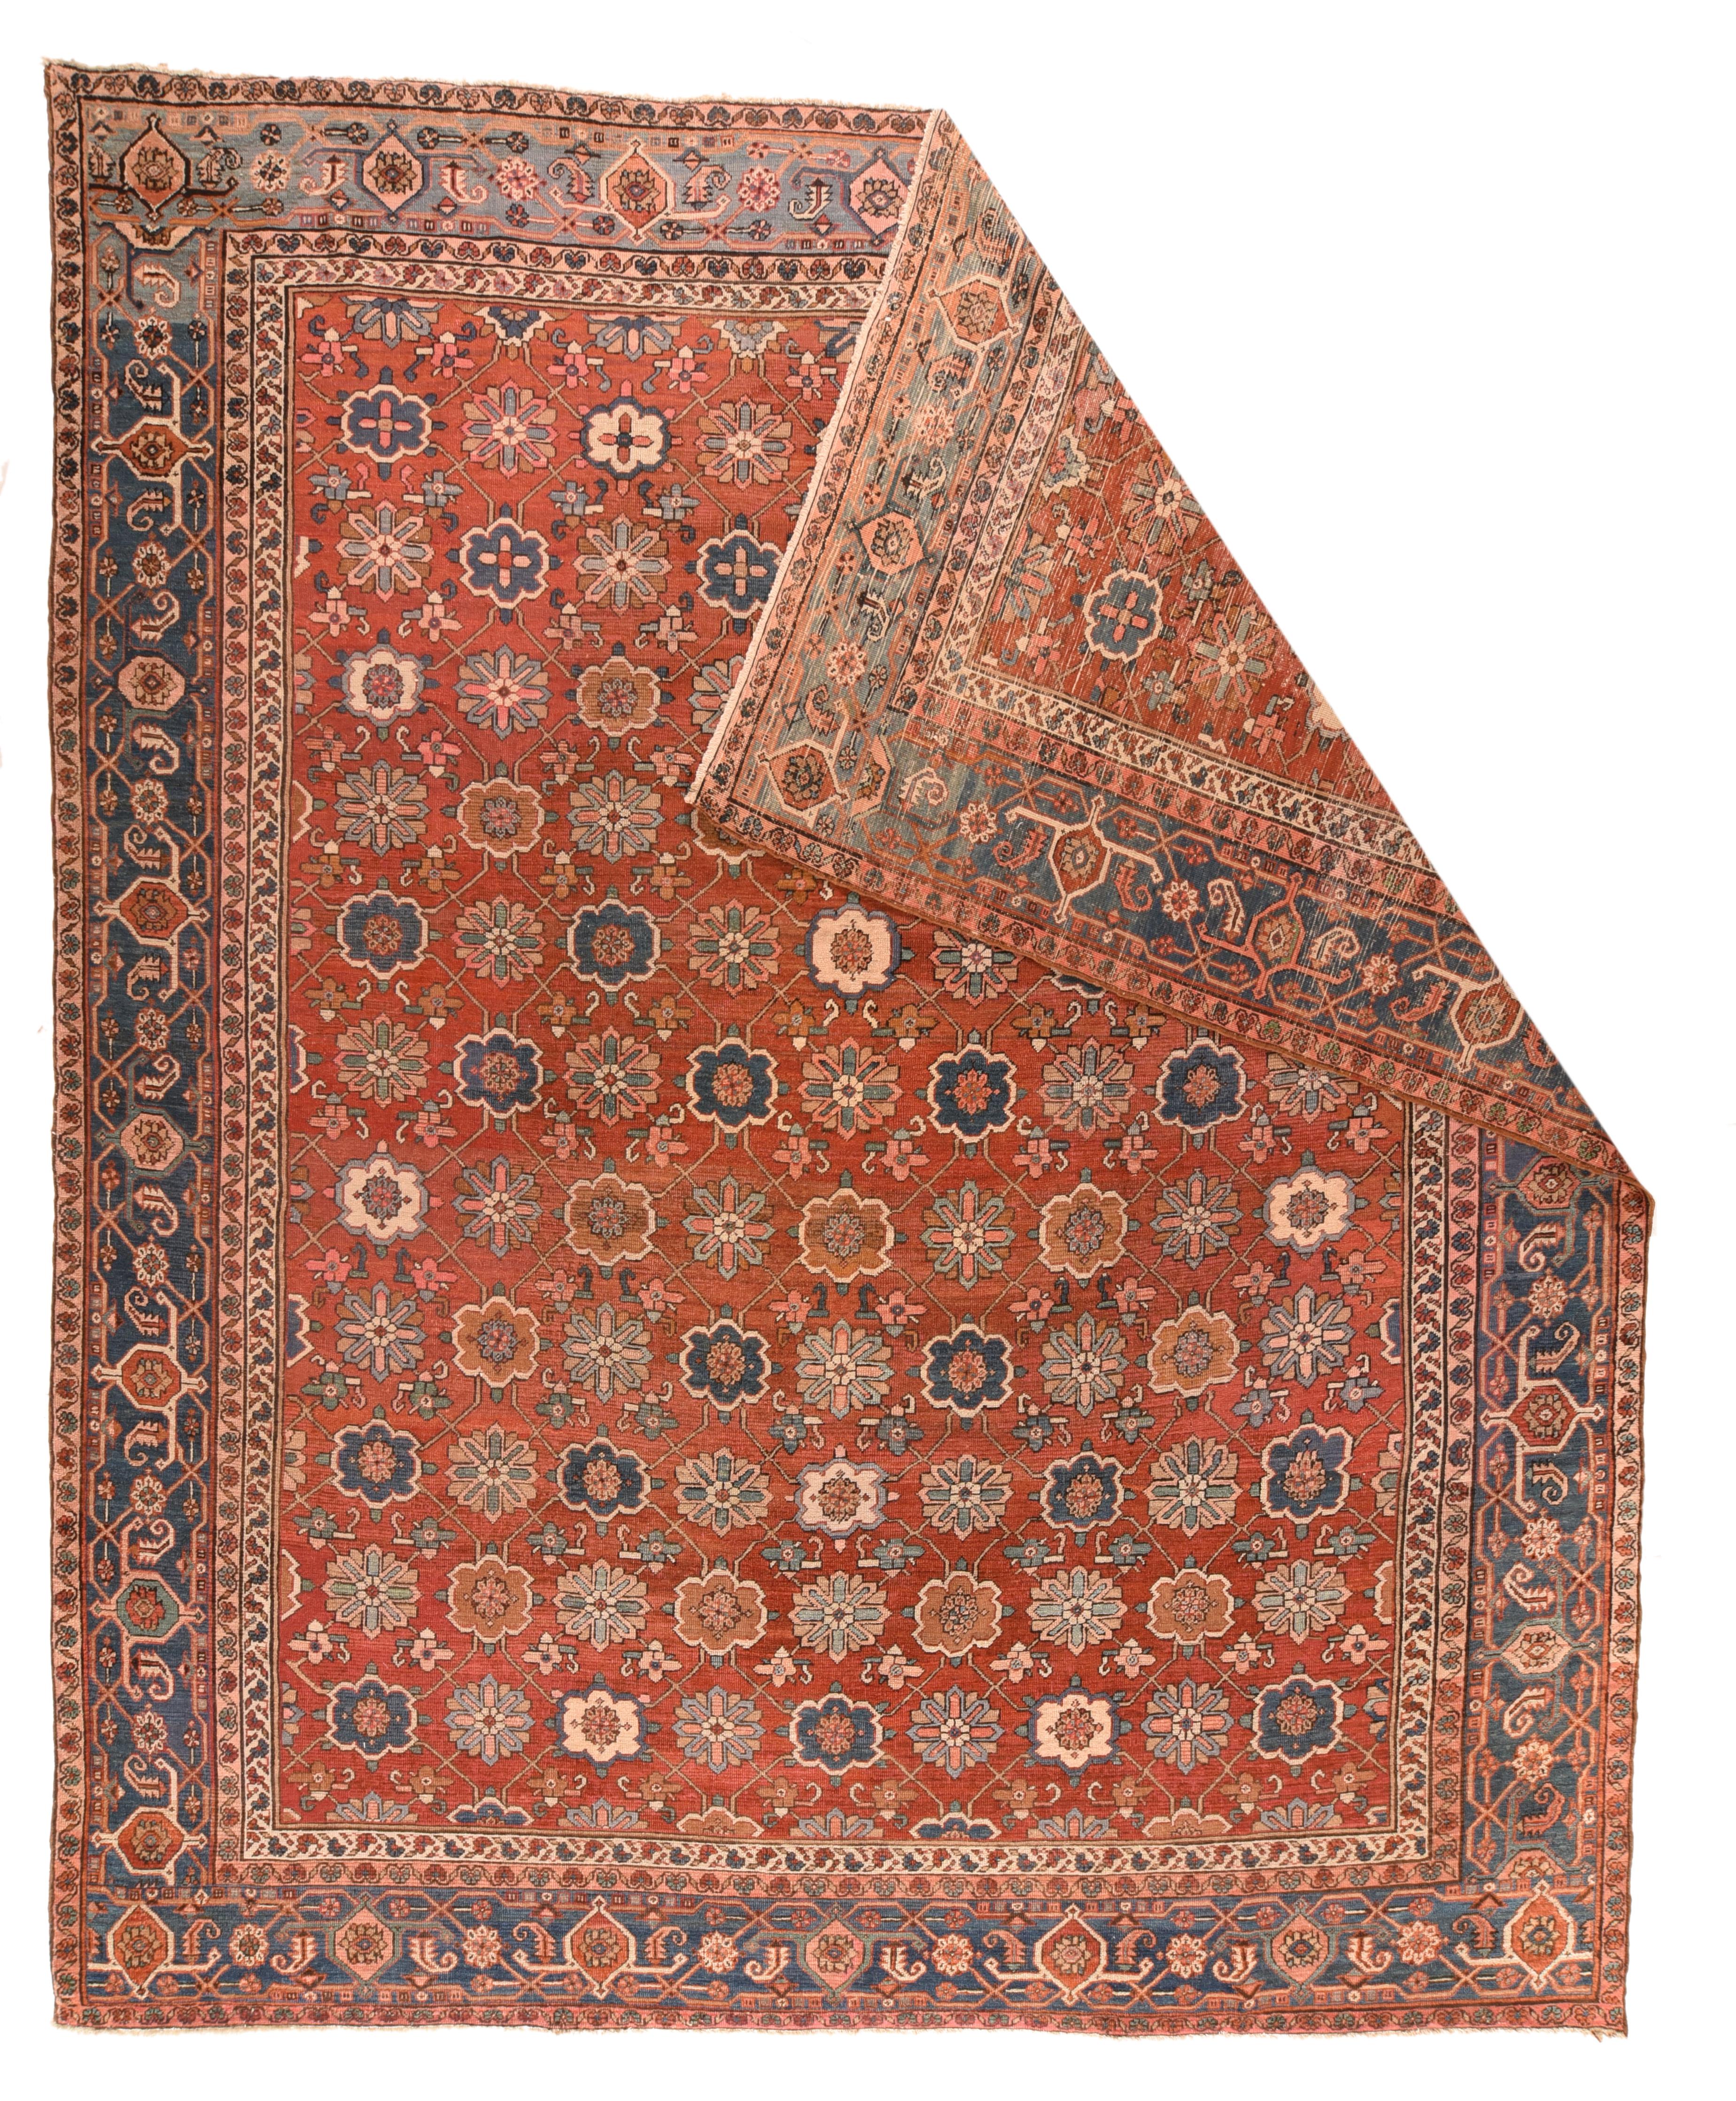 Antique Heriz rug 6'8'' x 9'4''. This attractive rustic NW Persian room size carpet displays a warm, clear madder red field supporting a version of the Mina Khani rosette trellis design., with two rosette styles, accented in light green, dark blue,